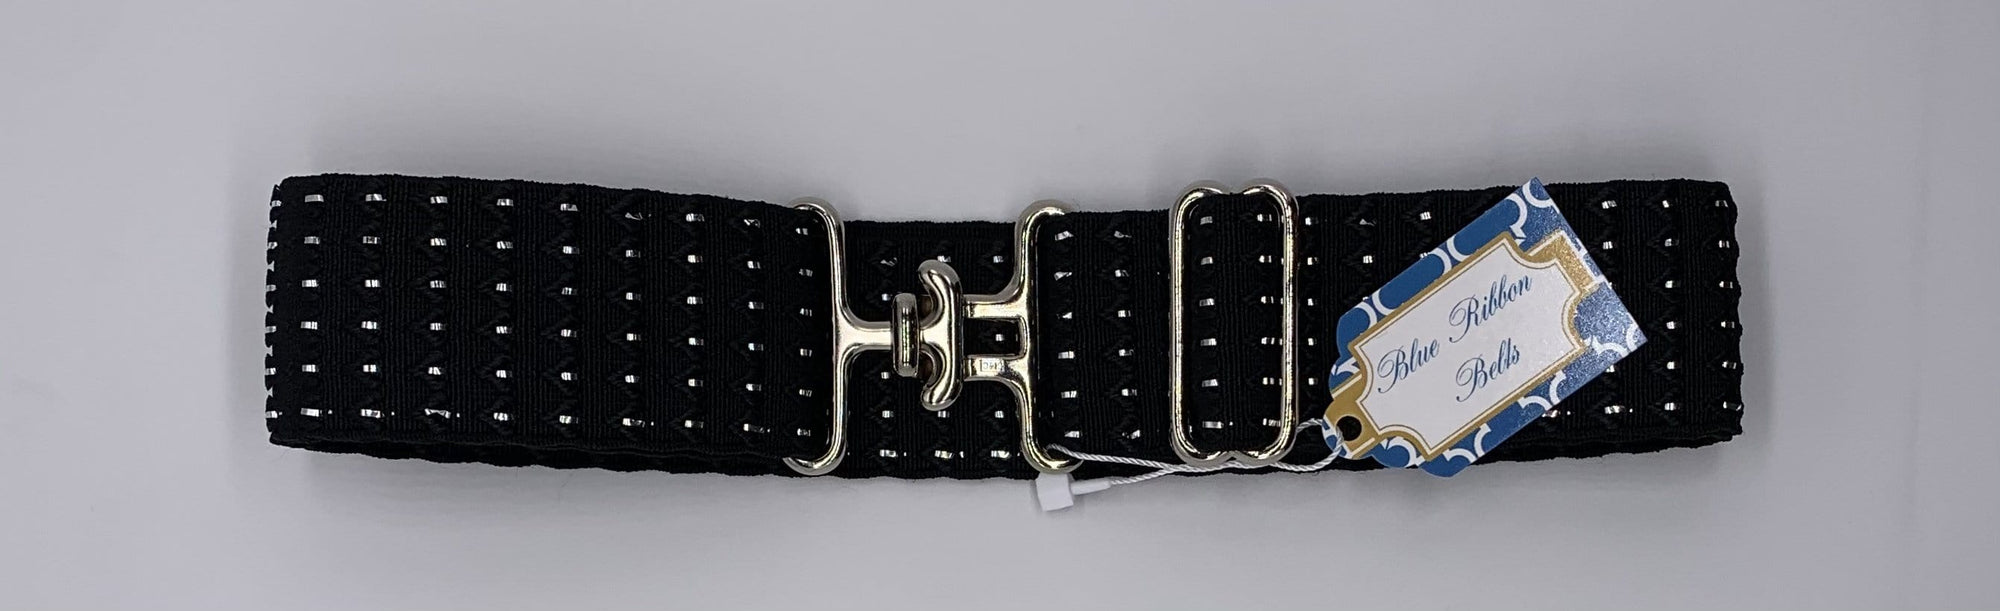 Blue Ribbon Belts Belt Black with Silver Speckle Belt 1.5 Inch equestrian team apparel online tack store mobile tack store custom farm apparel custom show stable clothing equestrian lifestyle horse show clothing riding clothes horses equestrian tack store